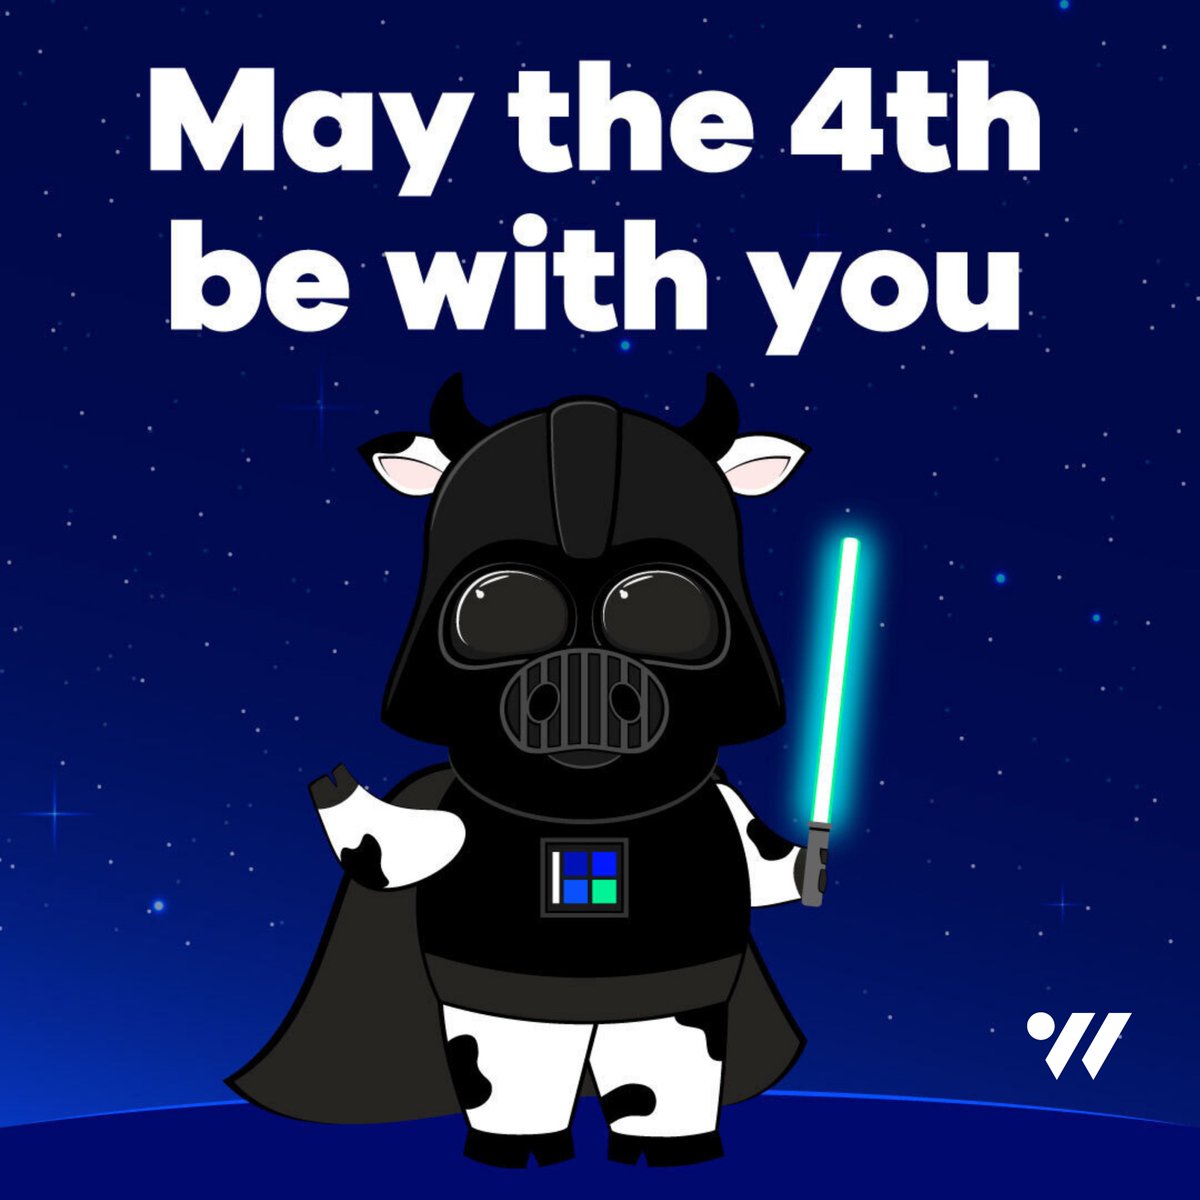 Today is Star Wars Day! A long time ago, in a galaxy far, far away, the Herd helped donate an iconic domain name, darthvader.com, to Lucasfilm Ltd! Learn more at the link below. tucows.com/i-am-your-fath… #MayThe4thBeWithYou #MakingTheInternetBetter